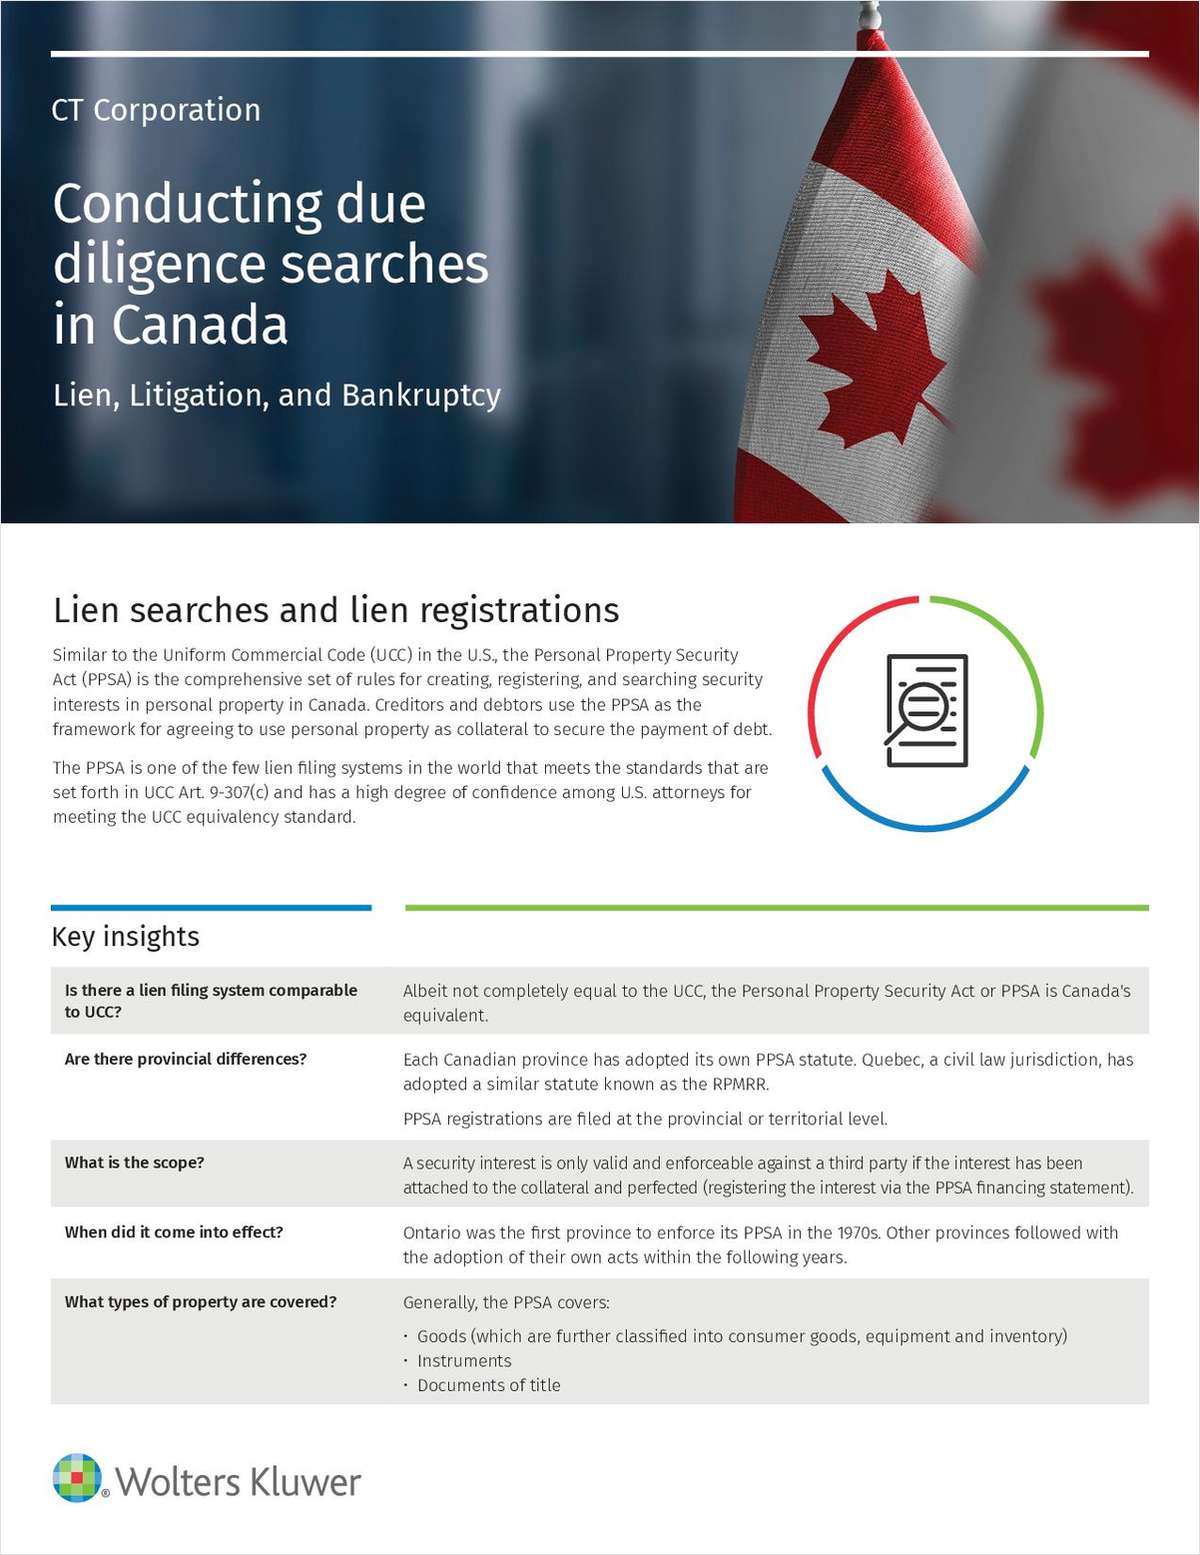 Conducting due diligence searches in Canada: Lien, Litigation & Bankruptcy